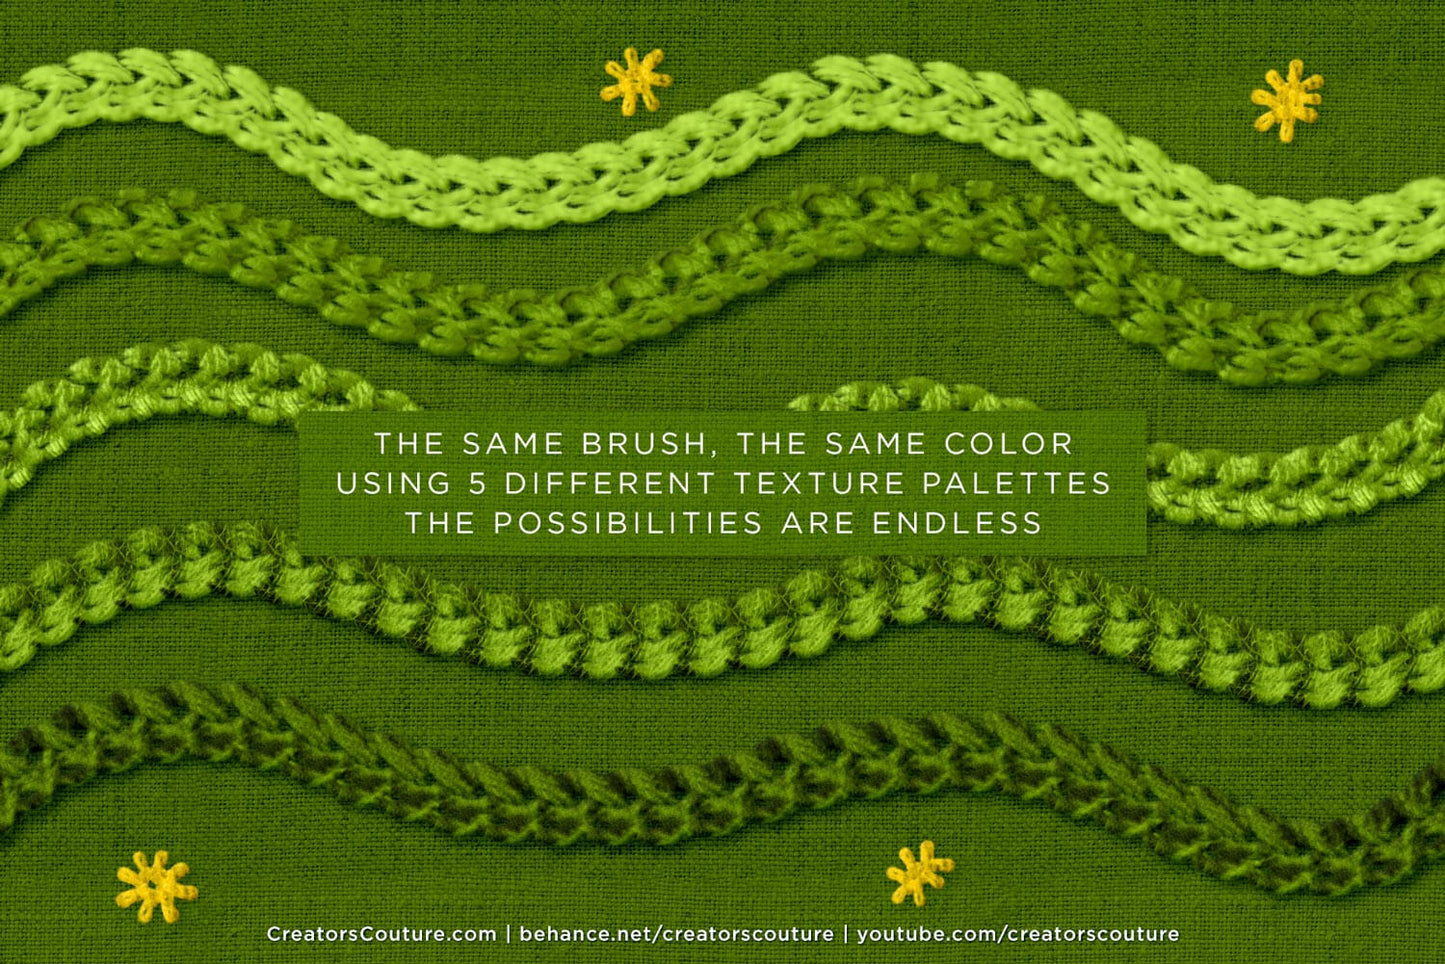 image showing the same embroidery brush but sampled from different texture palettes to create different 3d thread effects